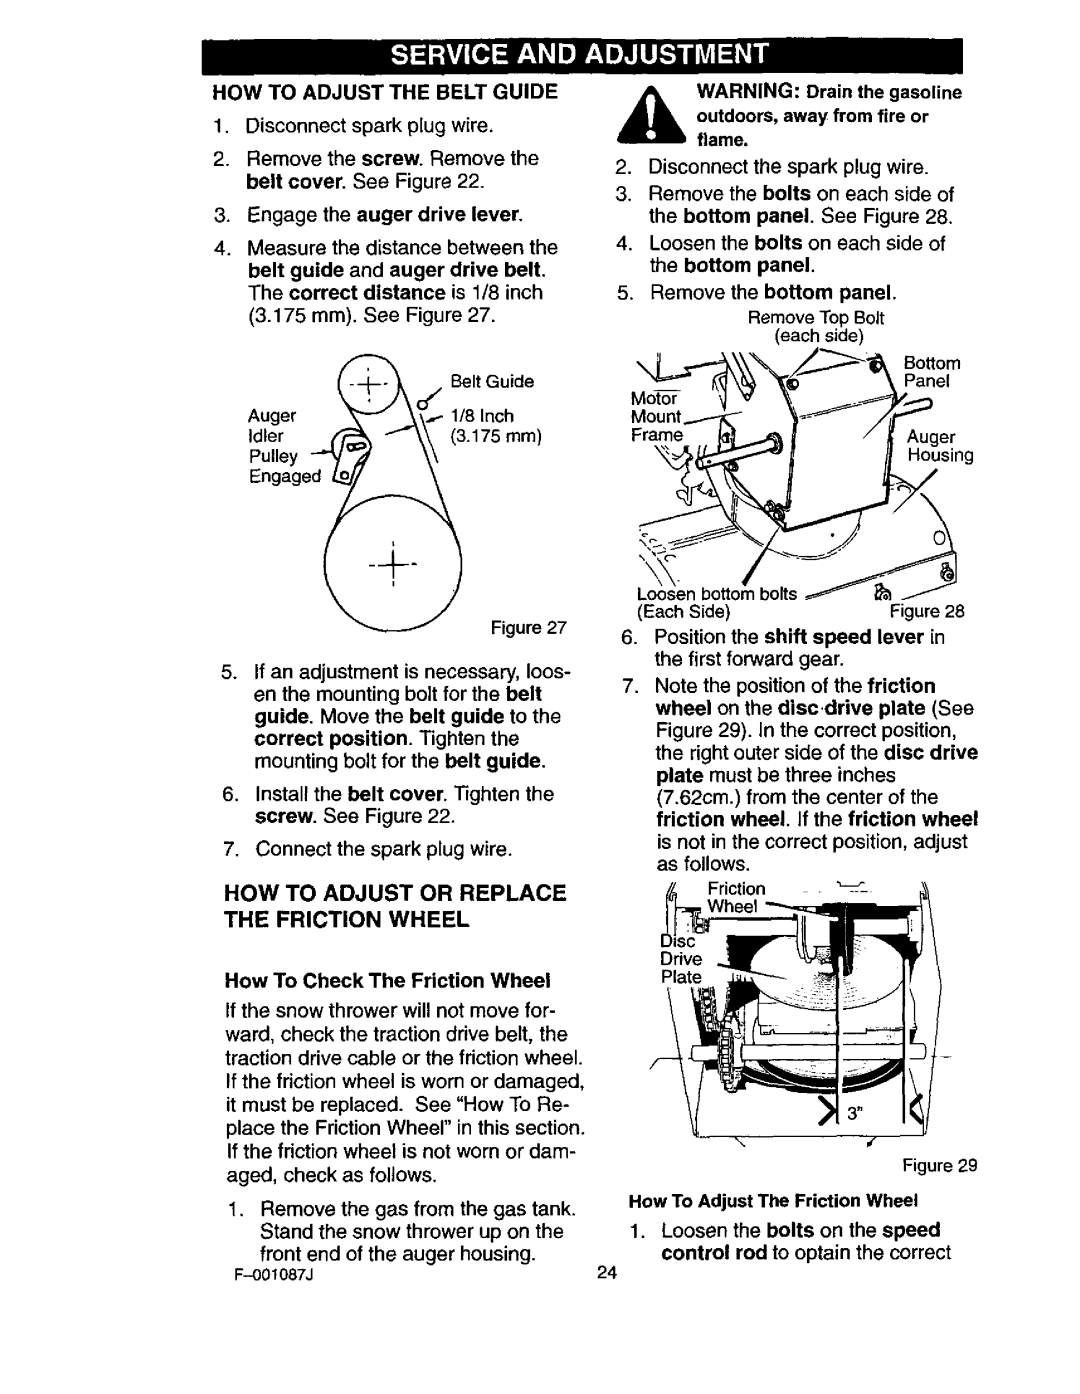 Craftsman 536.88644 HOW to Adjust or Replace the Friction Wheel, HOW to Adjust the Belt Guide, Remove Top Bolt each side 